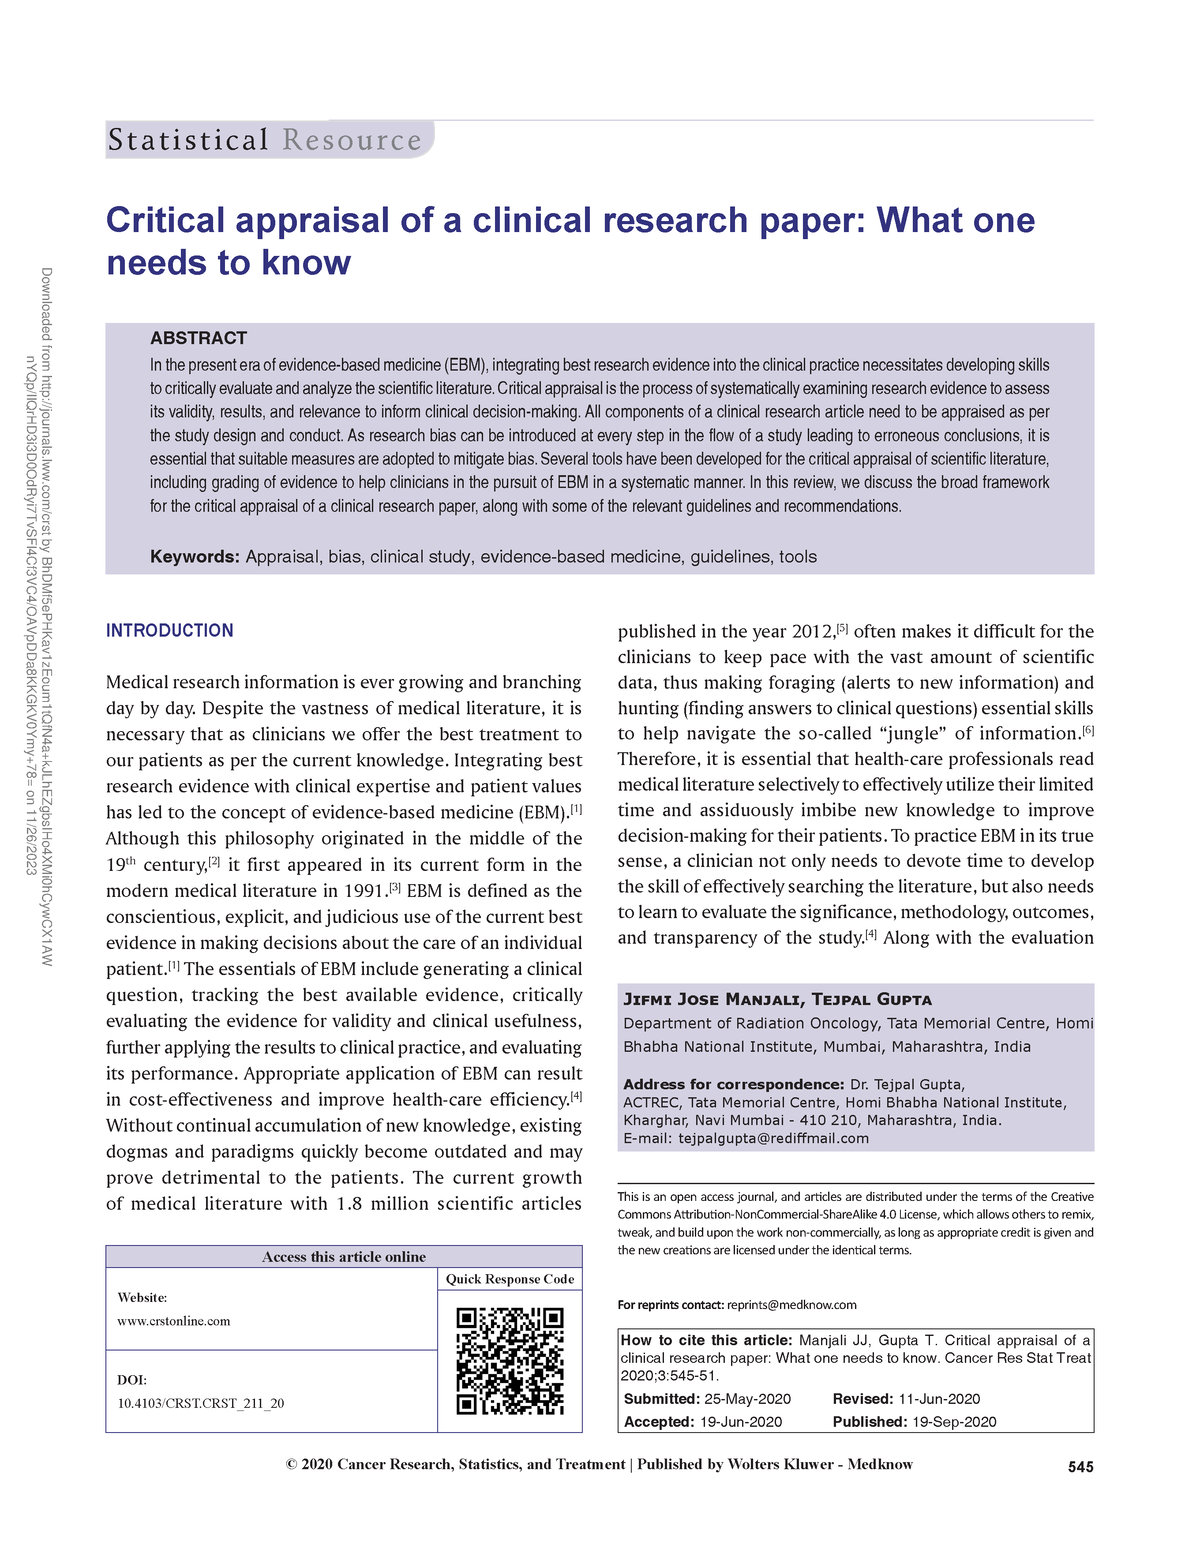 critical appraisal how to read a clinical research paper